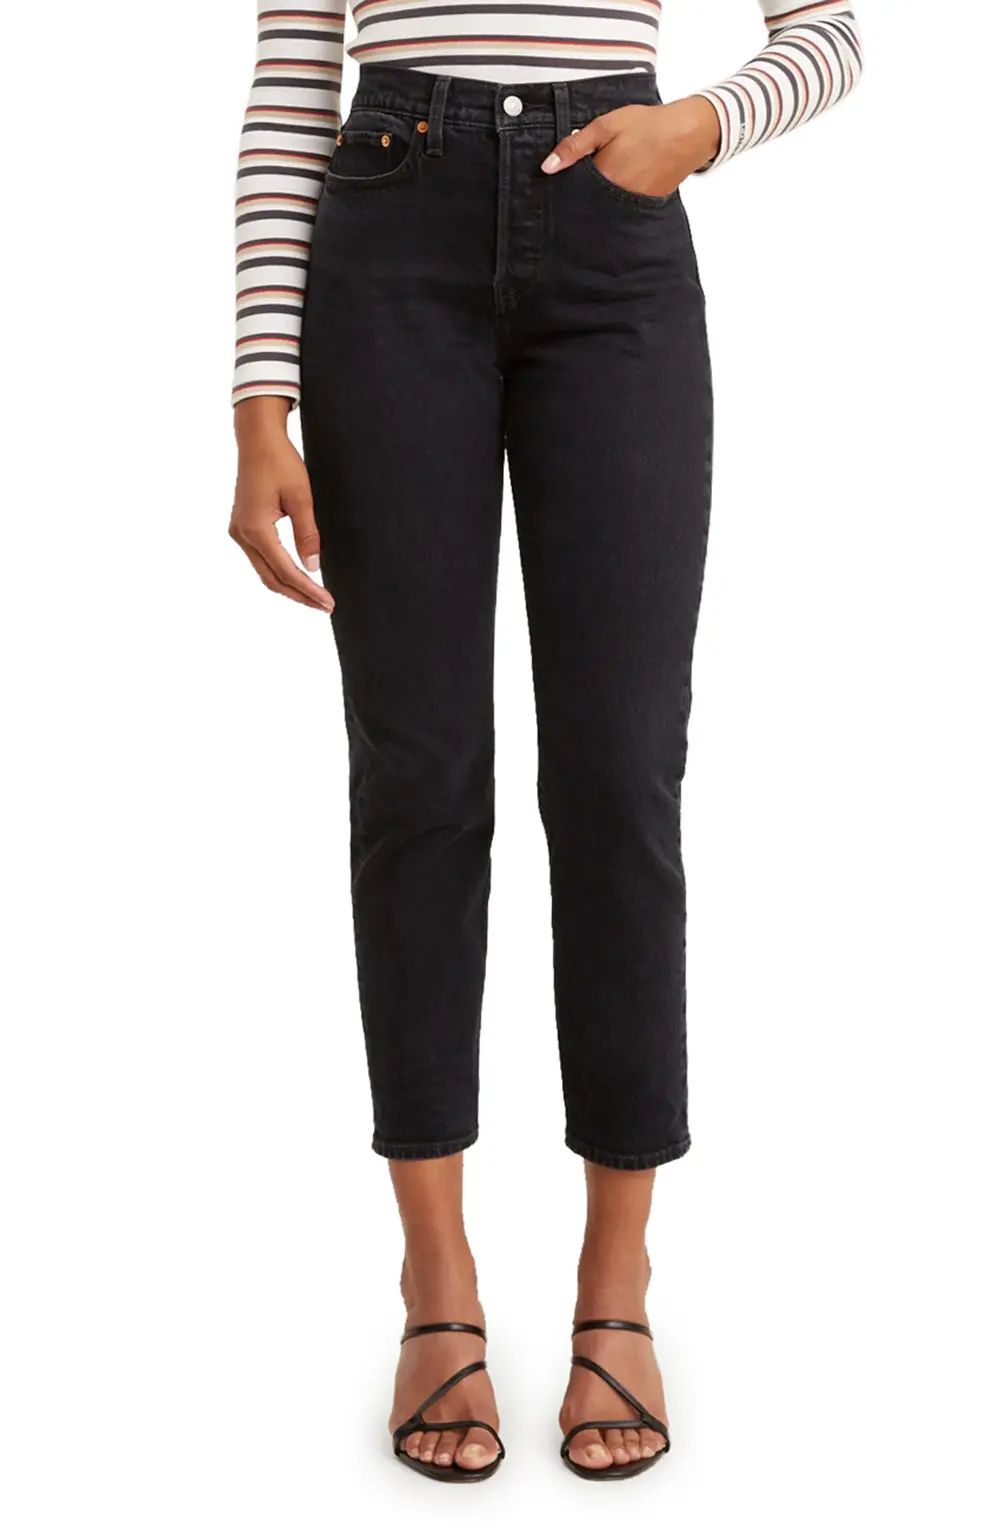 Levi's(R) Wedgie Icon Fit High Waist Ankle Jeans, Size 31 in Wild Bunch Without Destruction at Nords | Nordstrom Canada